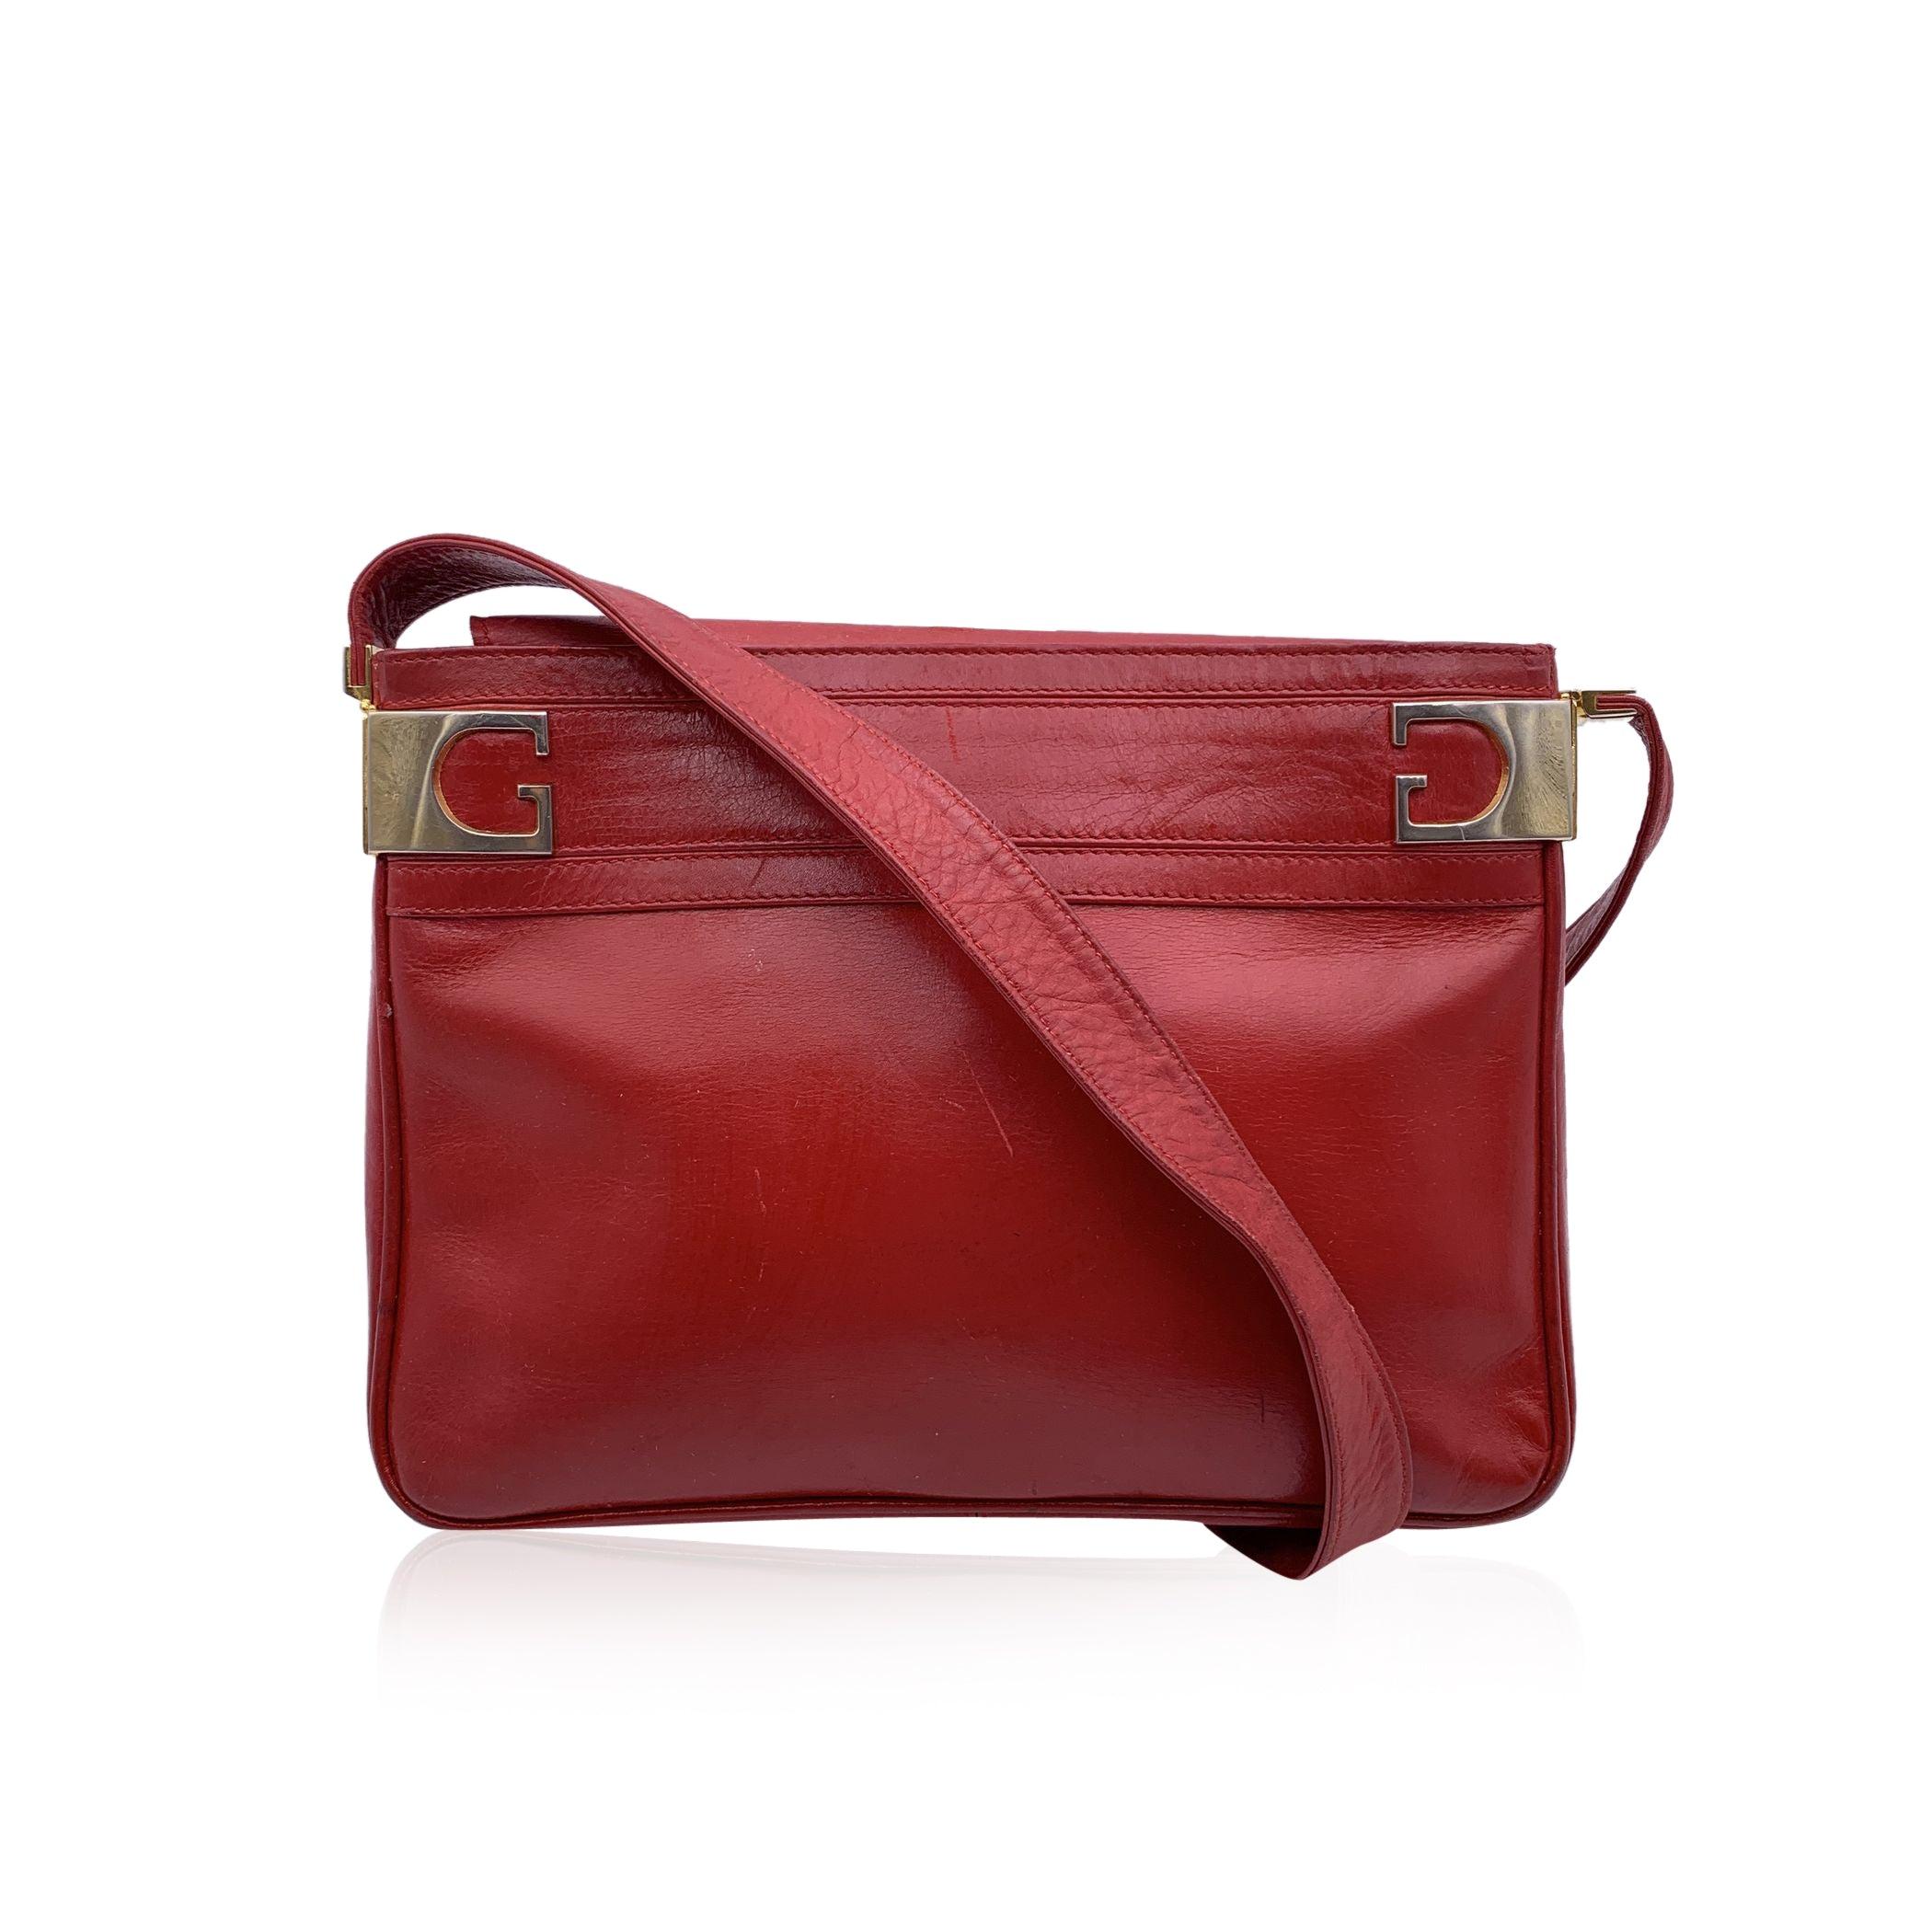 Gucci Vintage Red Leather Rectangular Bucket Shoulder Bag In Good Condition For Sale In Rome, Rome